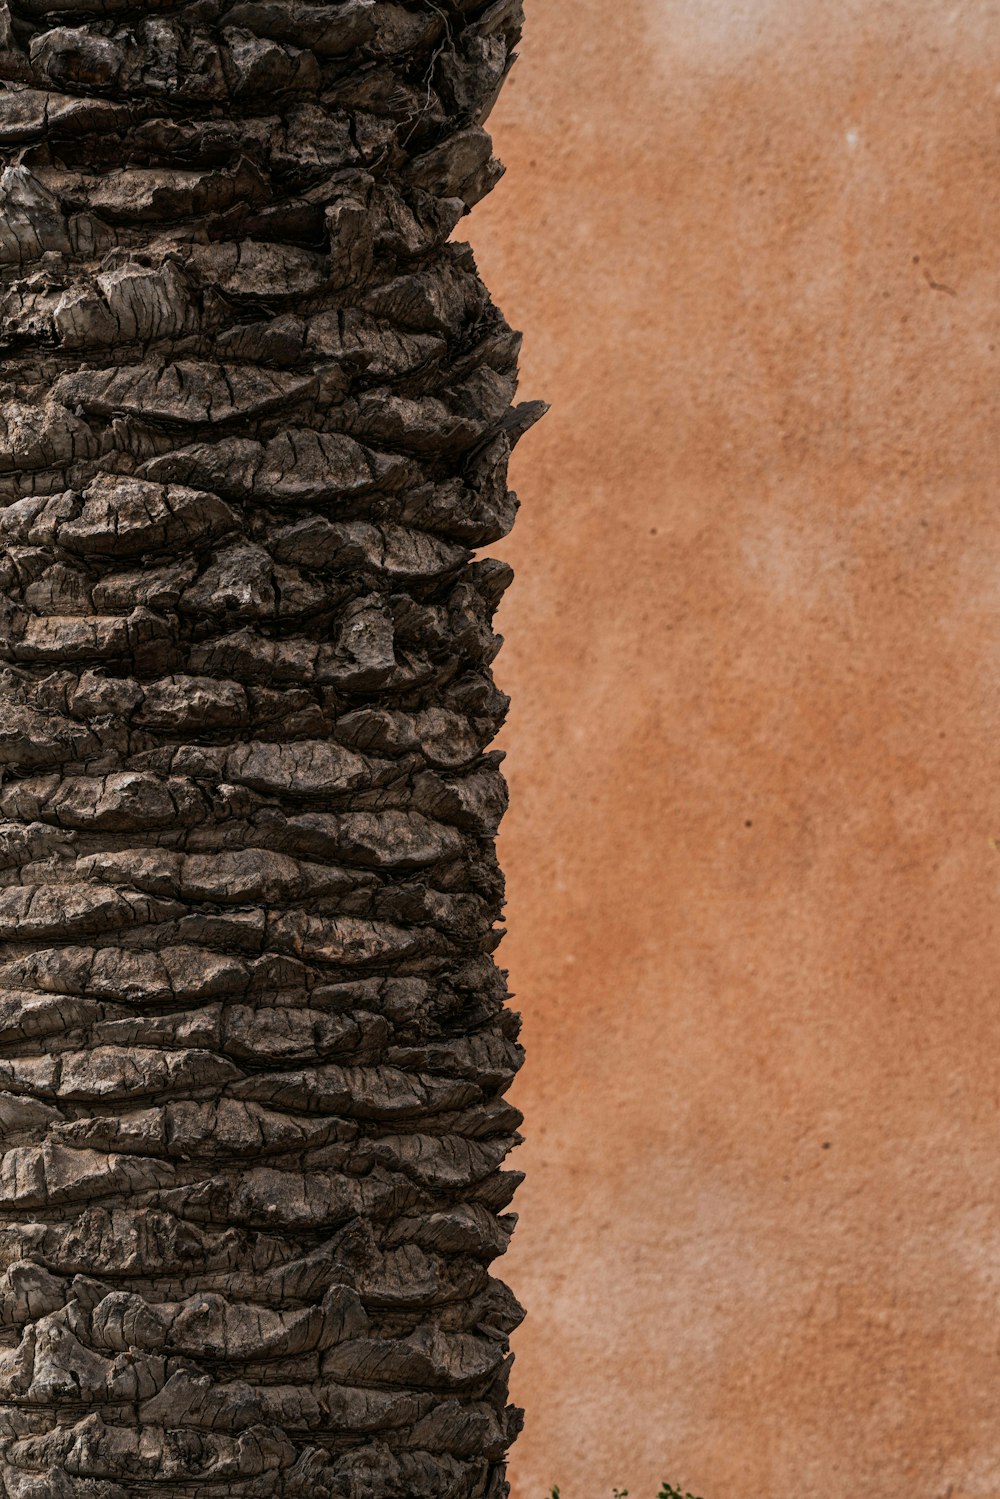 a close up of an elephant's trunk with a wall in the background